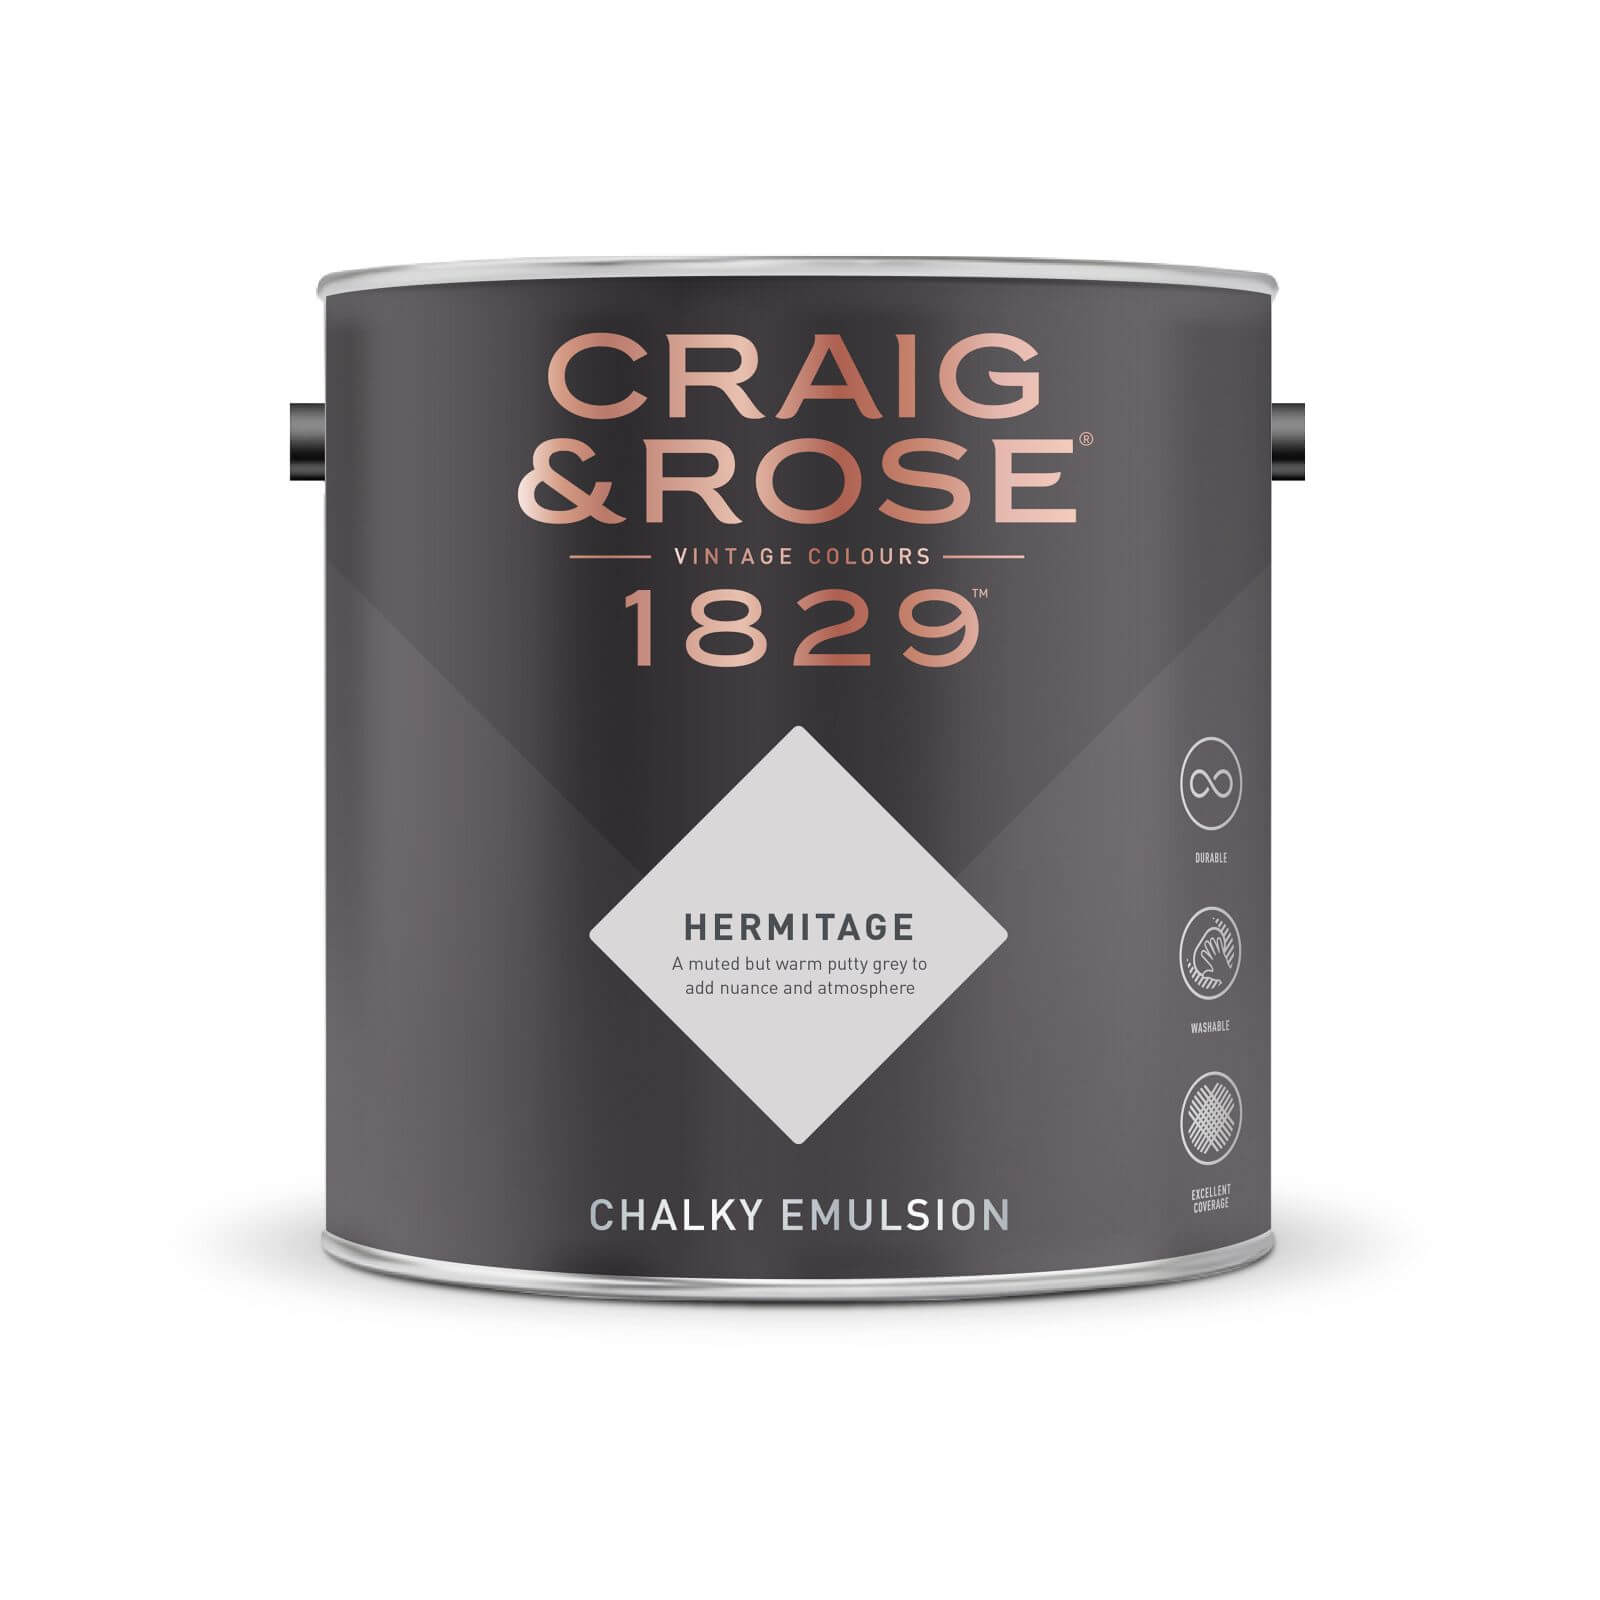 Craig & Rose 1829 Chalky Emulsion Paint Hermitage - 2.5L